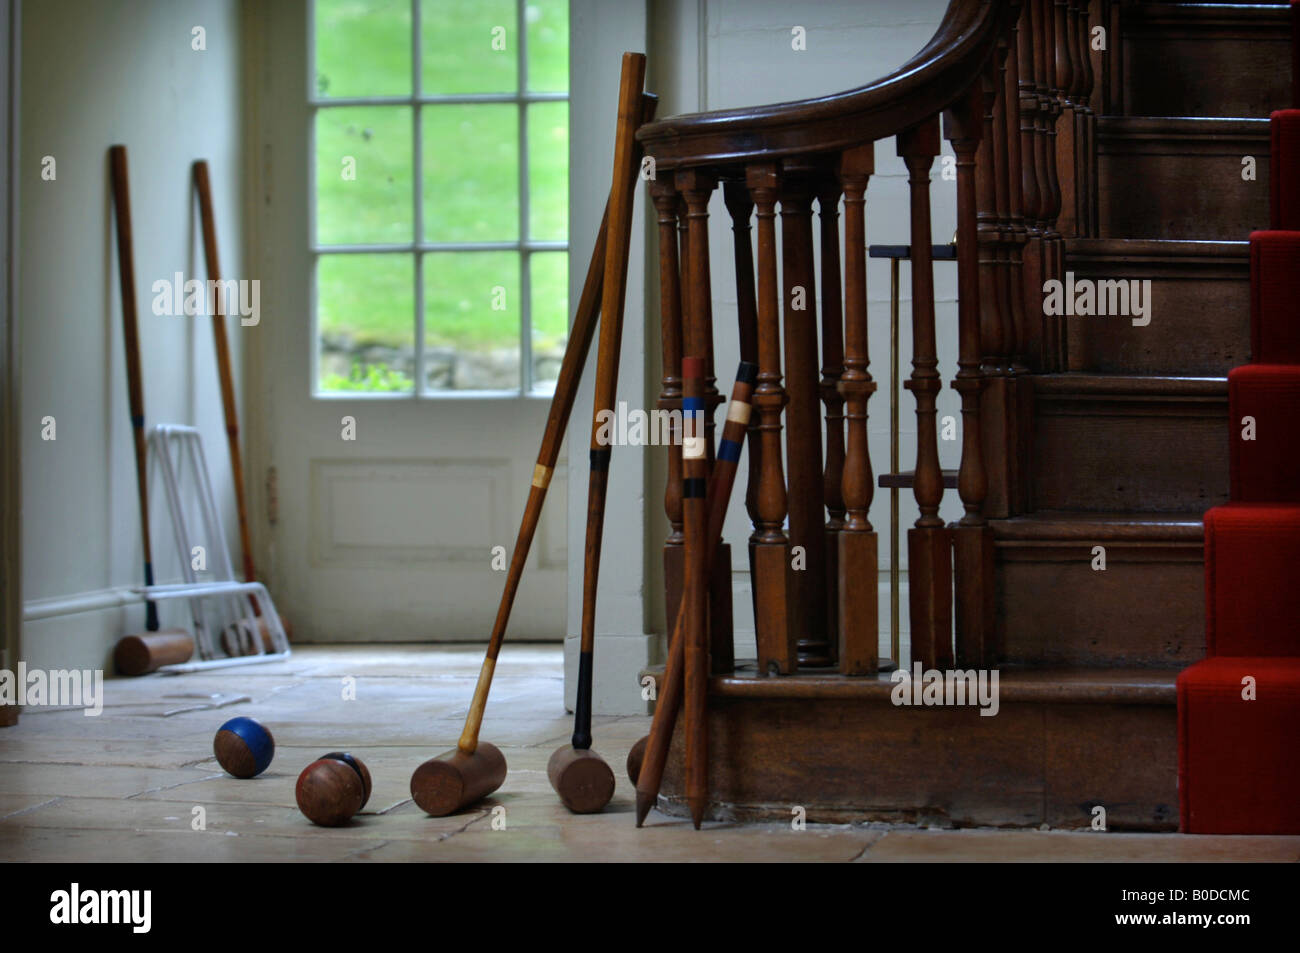 CROQUET MALLETS BALLS AND HOOPS BY THE BACK DOOR OF A COUNTRY HOUSE UK Stock Photo